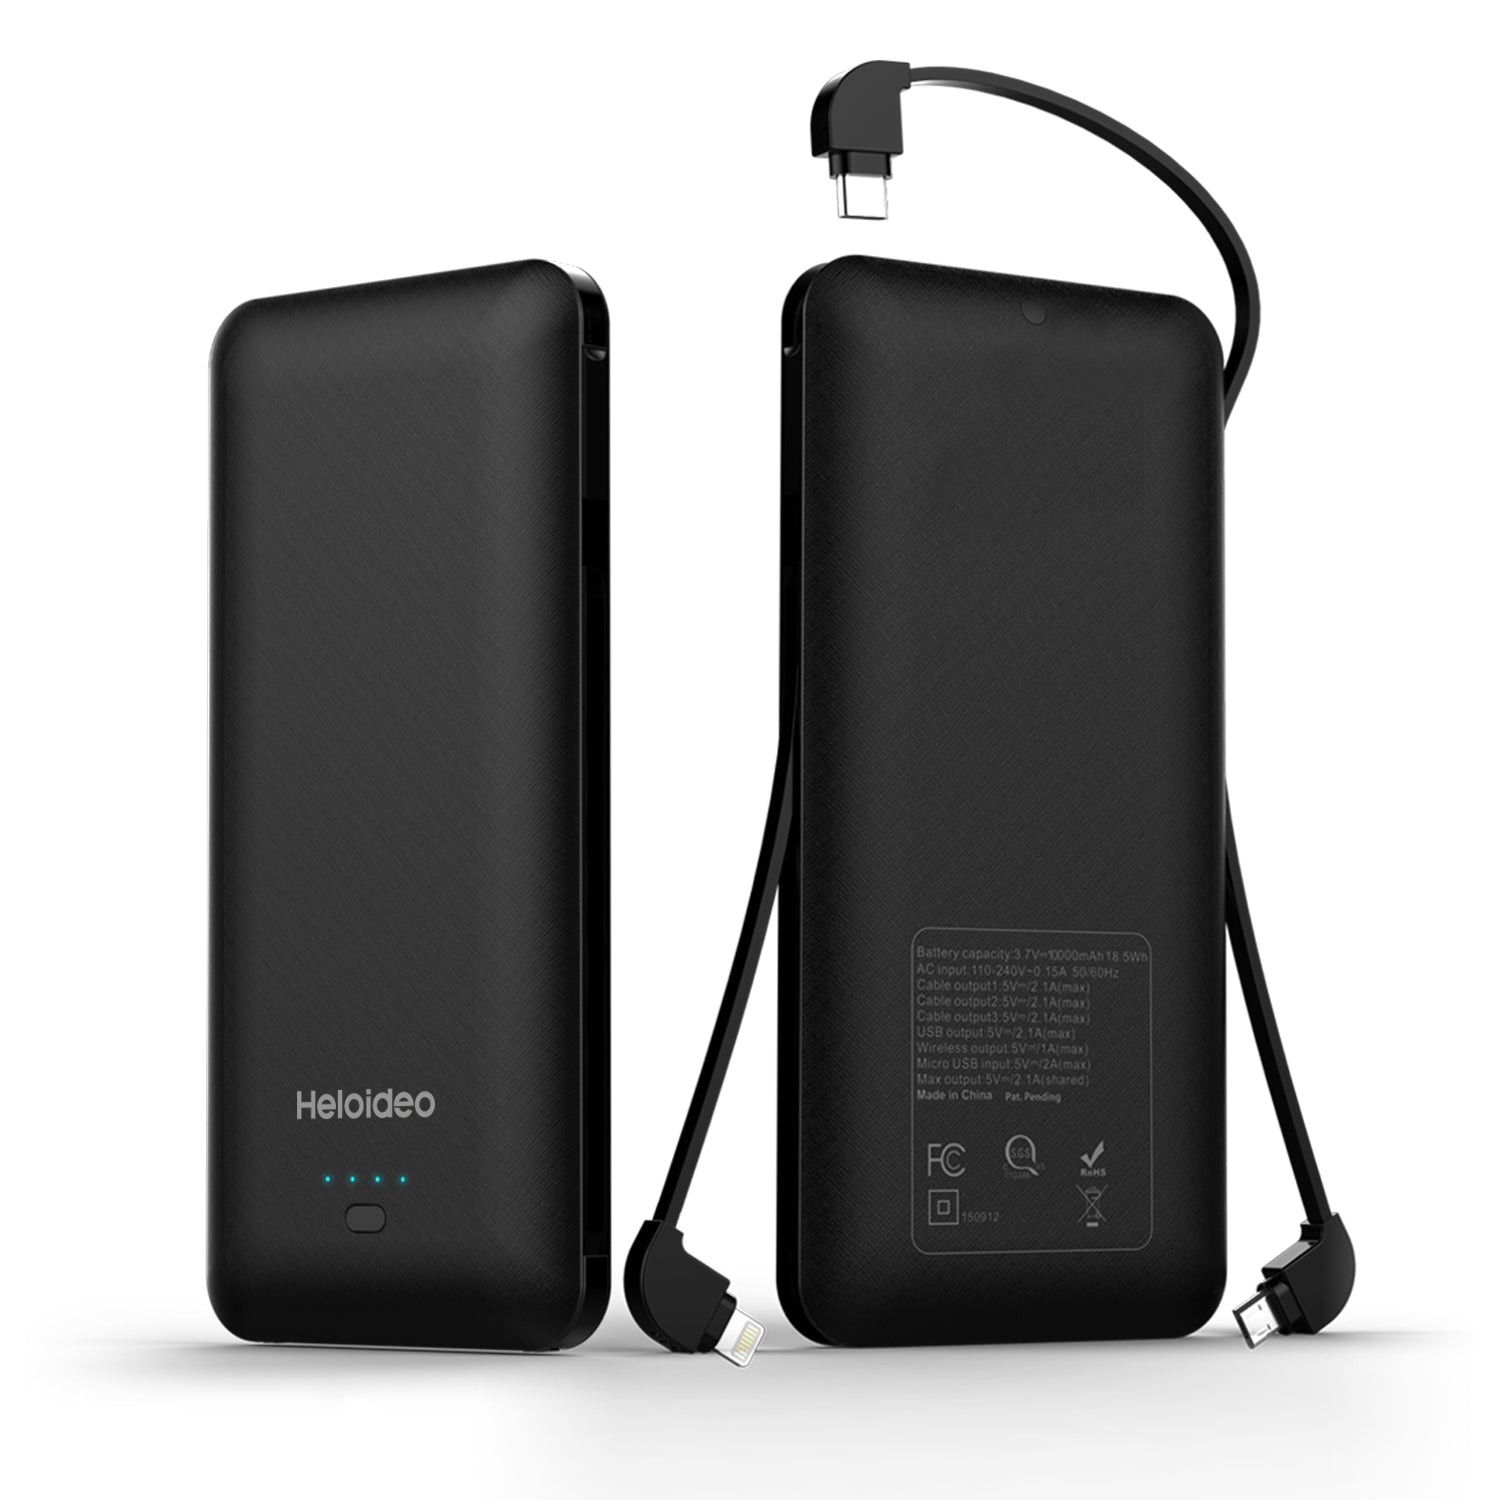 dorst Knuppel Exclusief NO AC plug Portable Best Power Bank built-in Lightning micro type cable  10000mAh – Heloideo